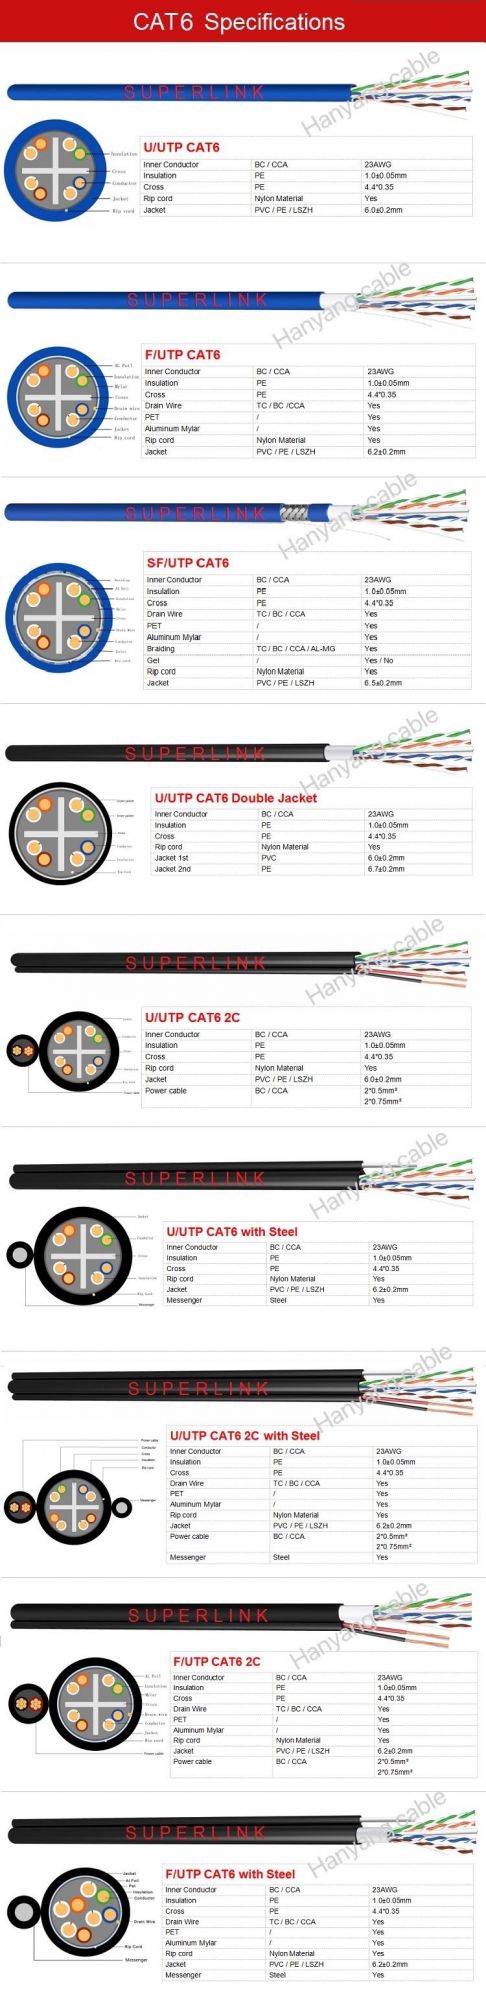 Pure Copper Network Cable Gigabit Project CAT6A Oxygen-Free Copper Double Shielded Household Network Cable 305 Meters Full Box